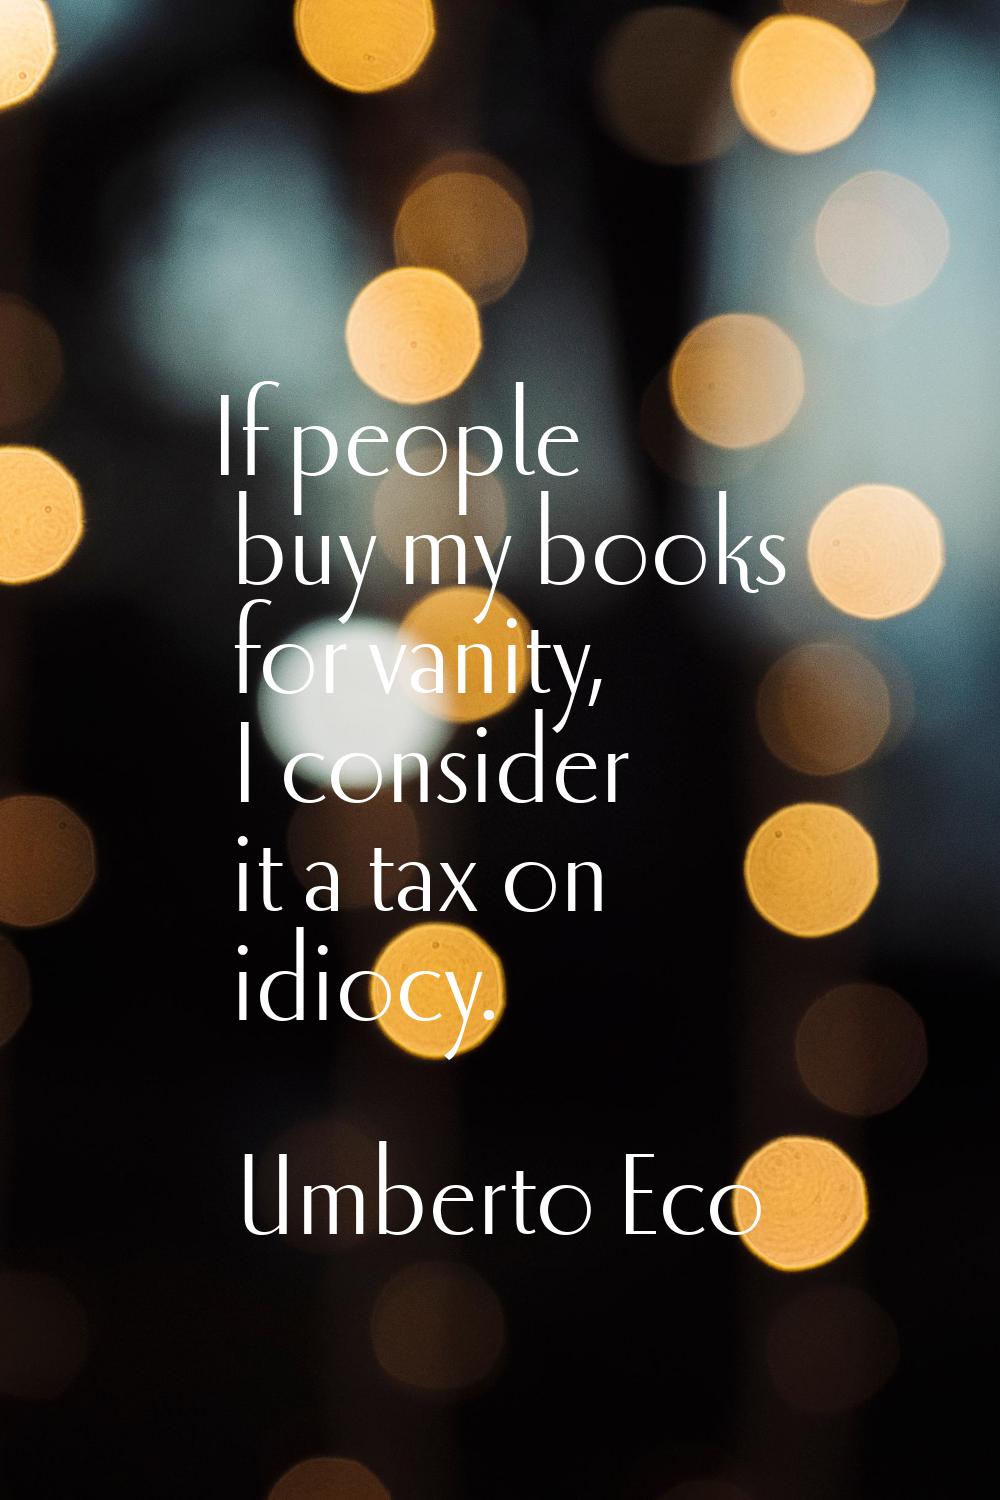 If people buy my books for vanity, I consider it a tax on idiocy.